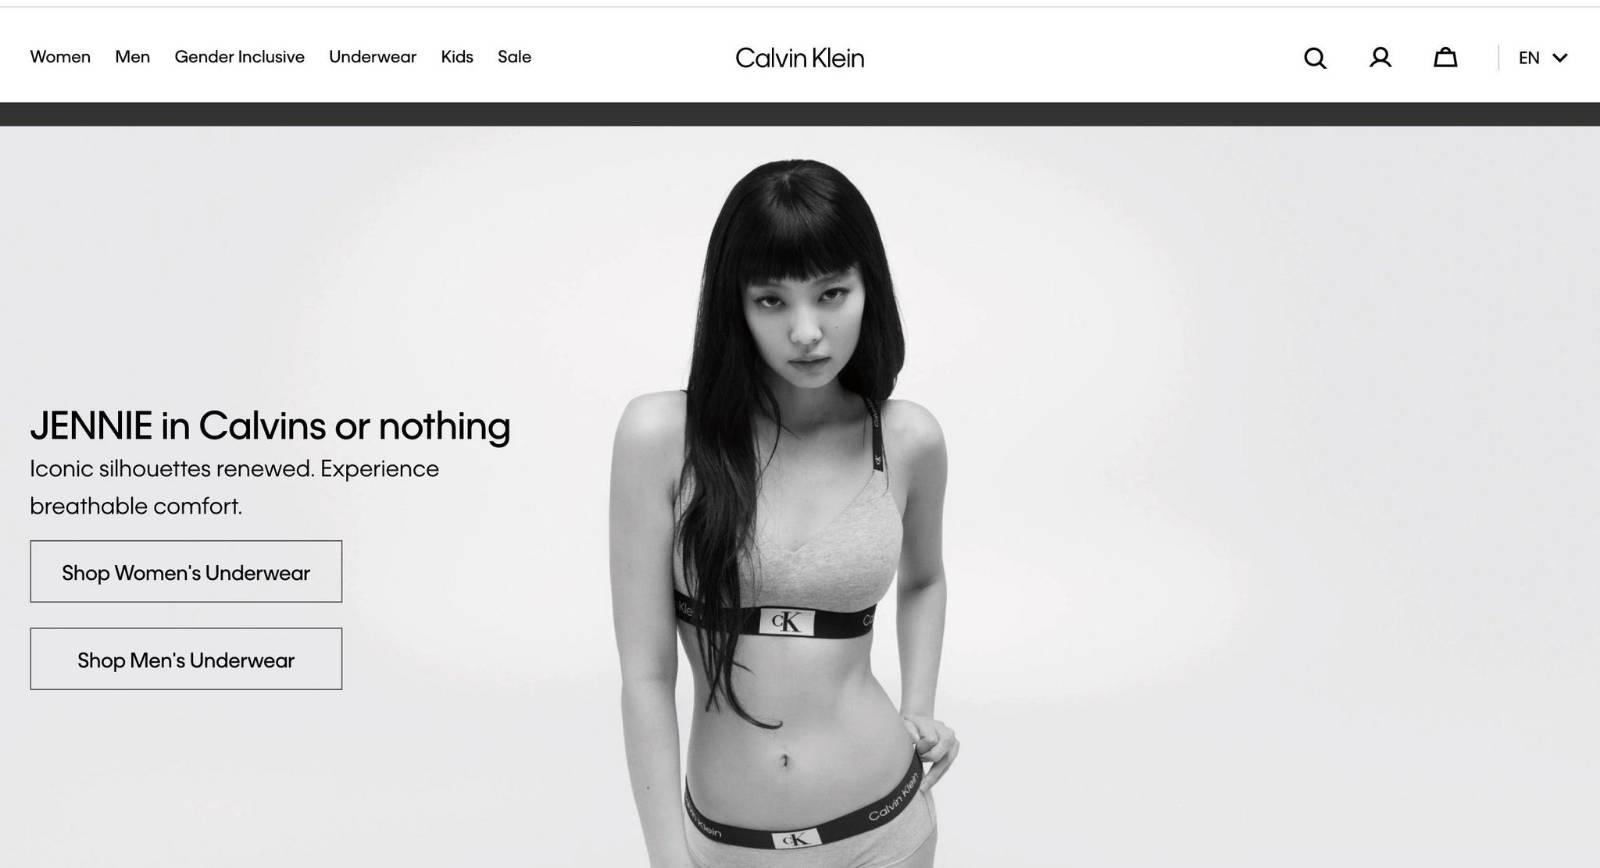 calvinklein on X: 1996 is the moment. JENNIE in Calvin Klein 1996